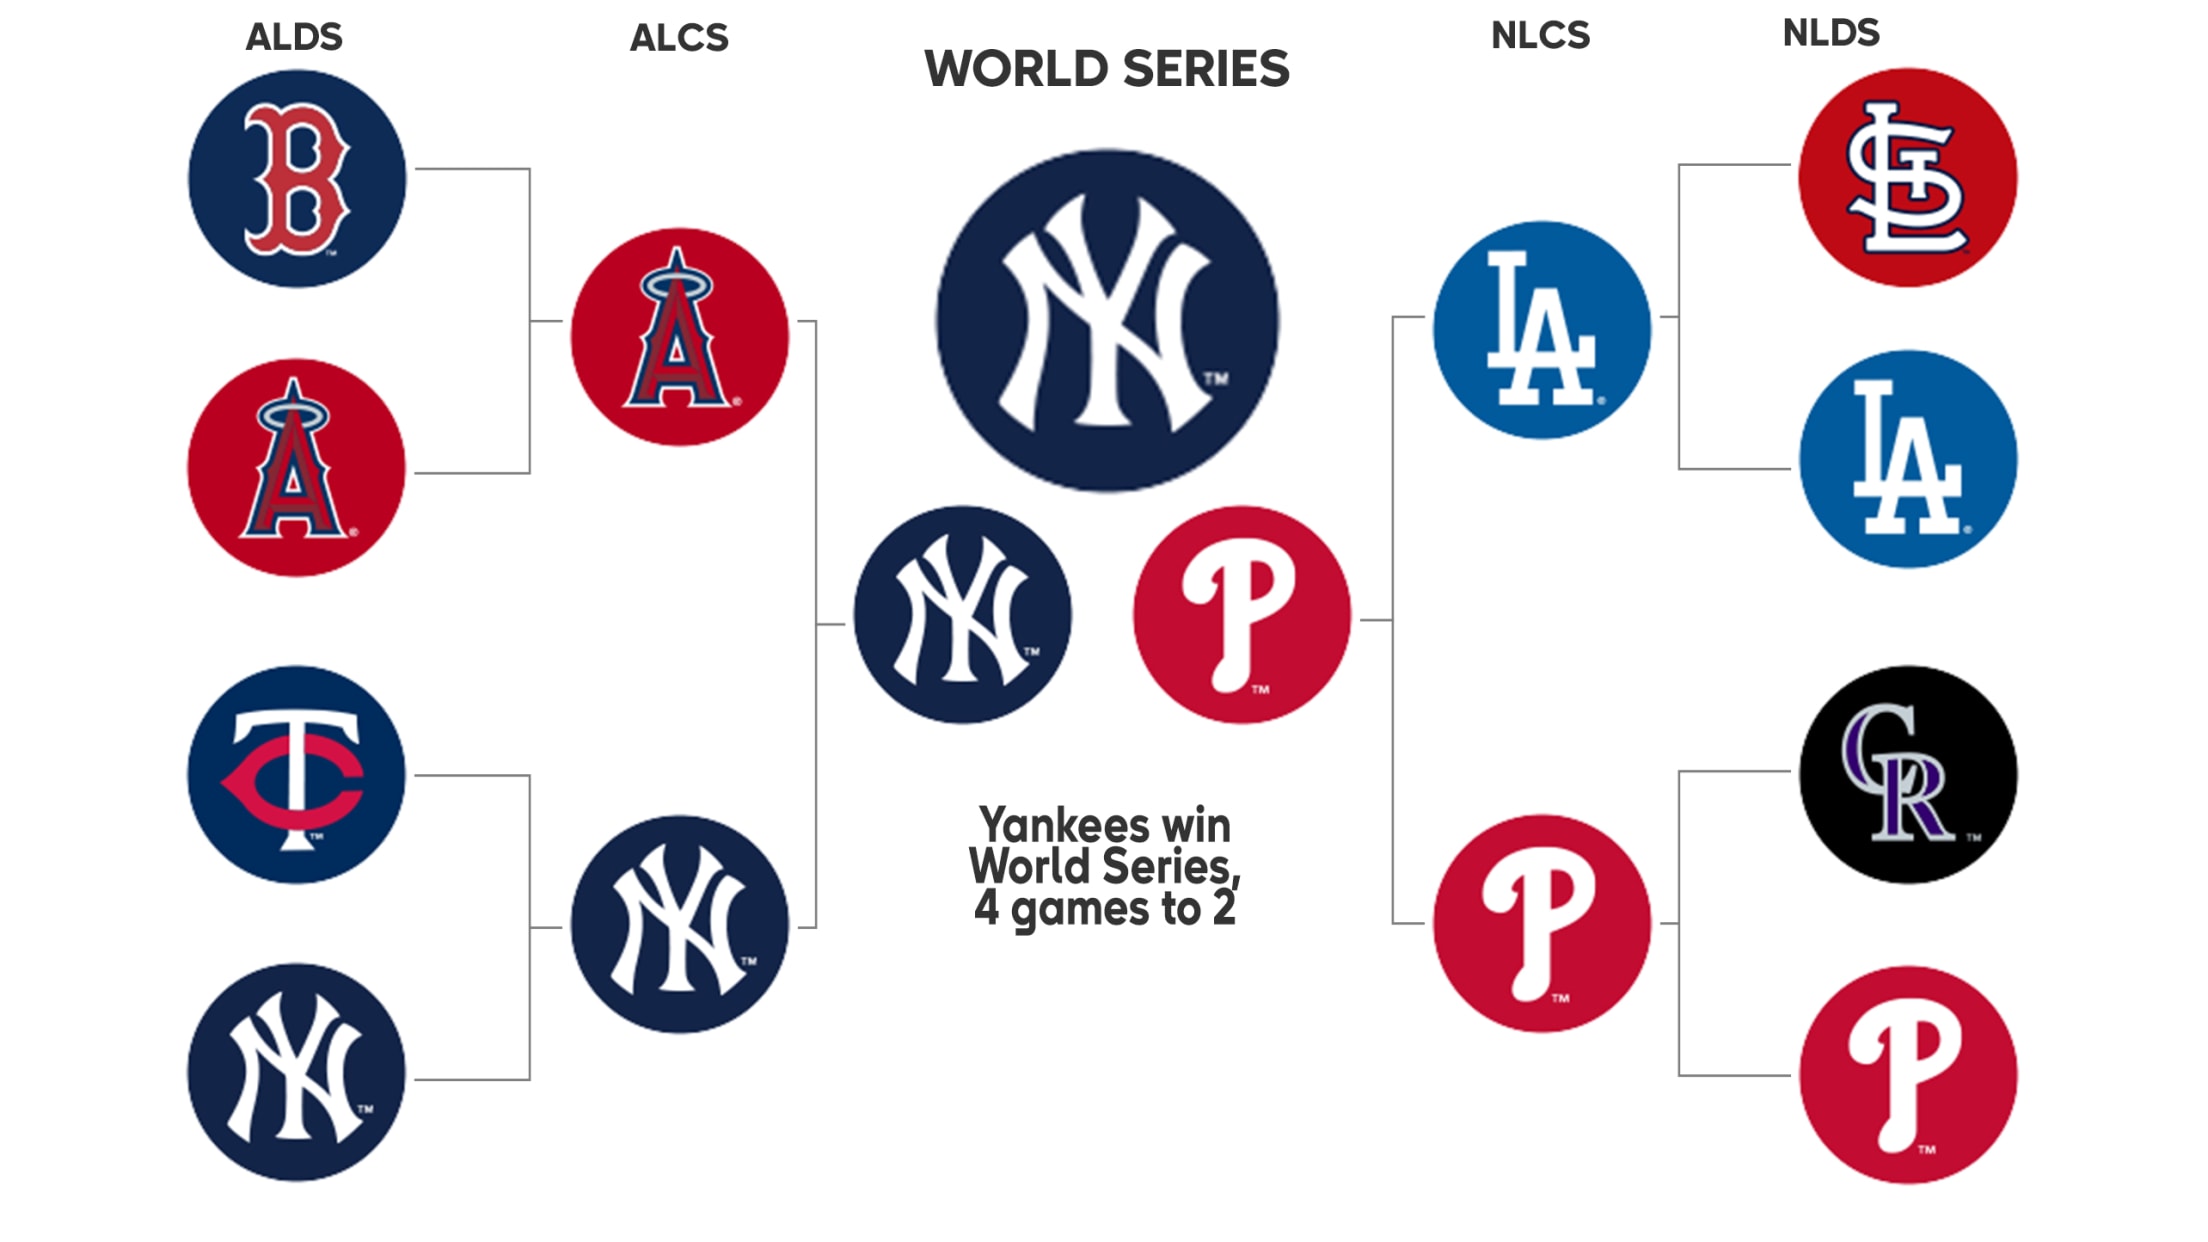 Play Ball! Complex's 2009 MLB Playoff Preview